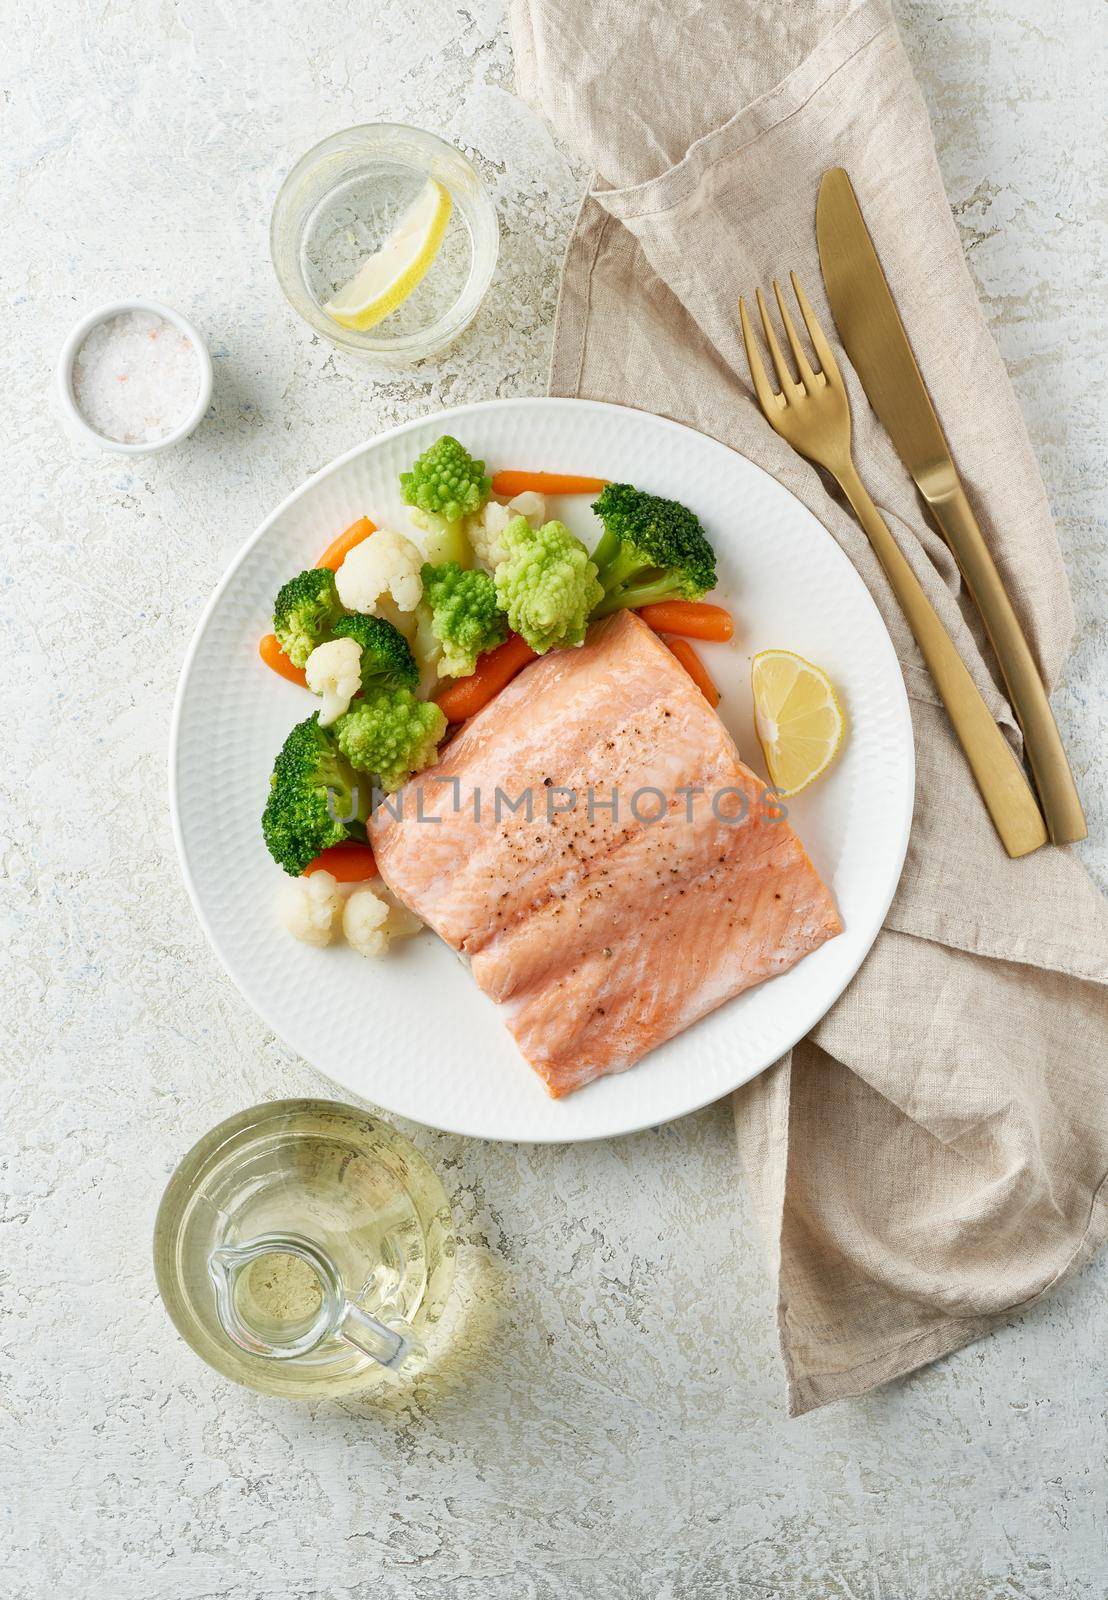 Steam salmon and vegetables, Paleo, keto, fodmap, dash diet. Mediterranean diet with steamed fish. Healthy concept, white plate on gray table, gluten free, lectine free, top view, vertical